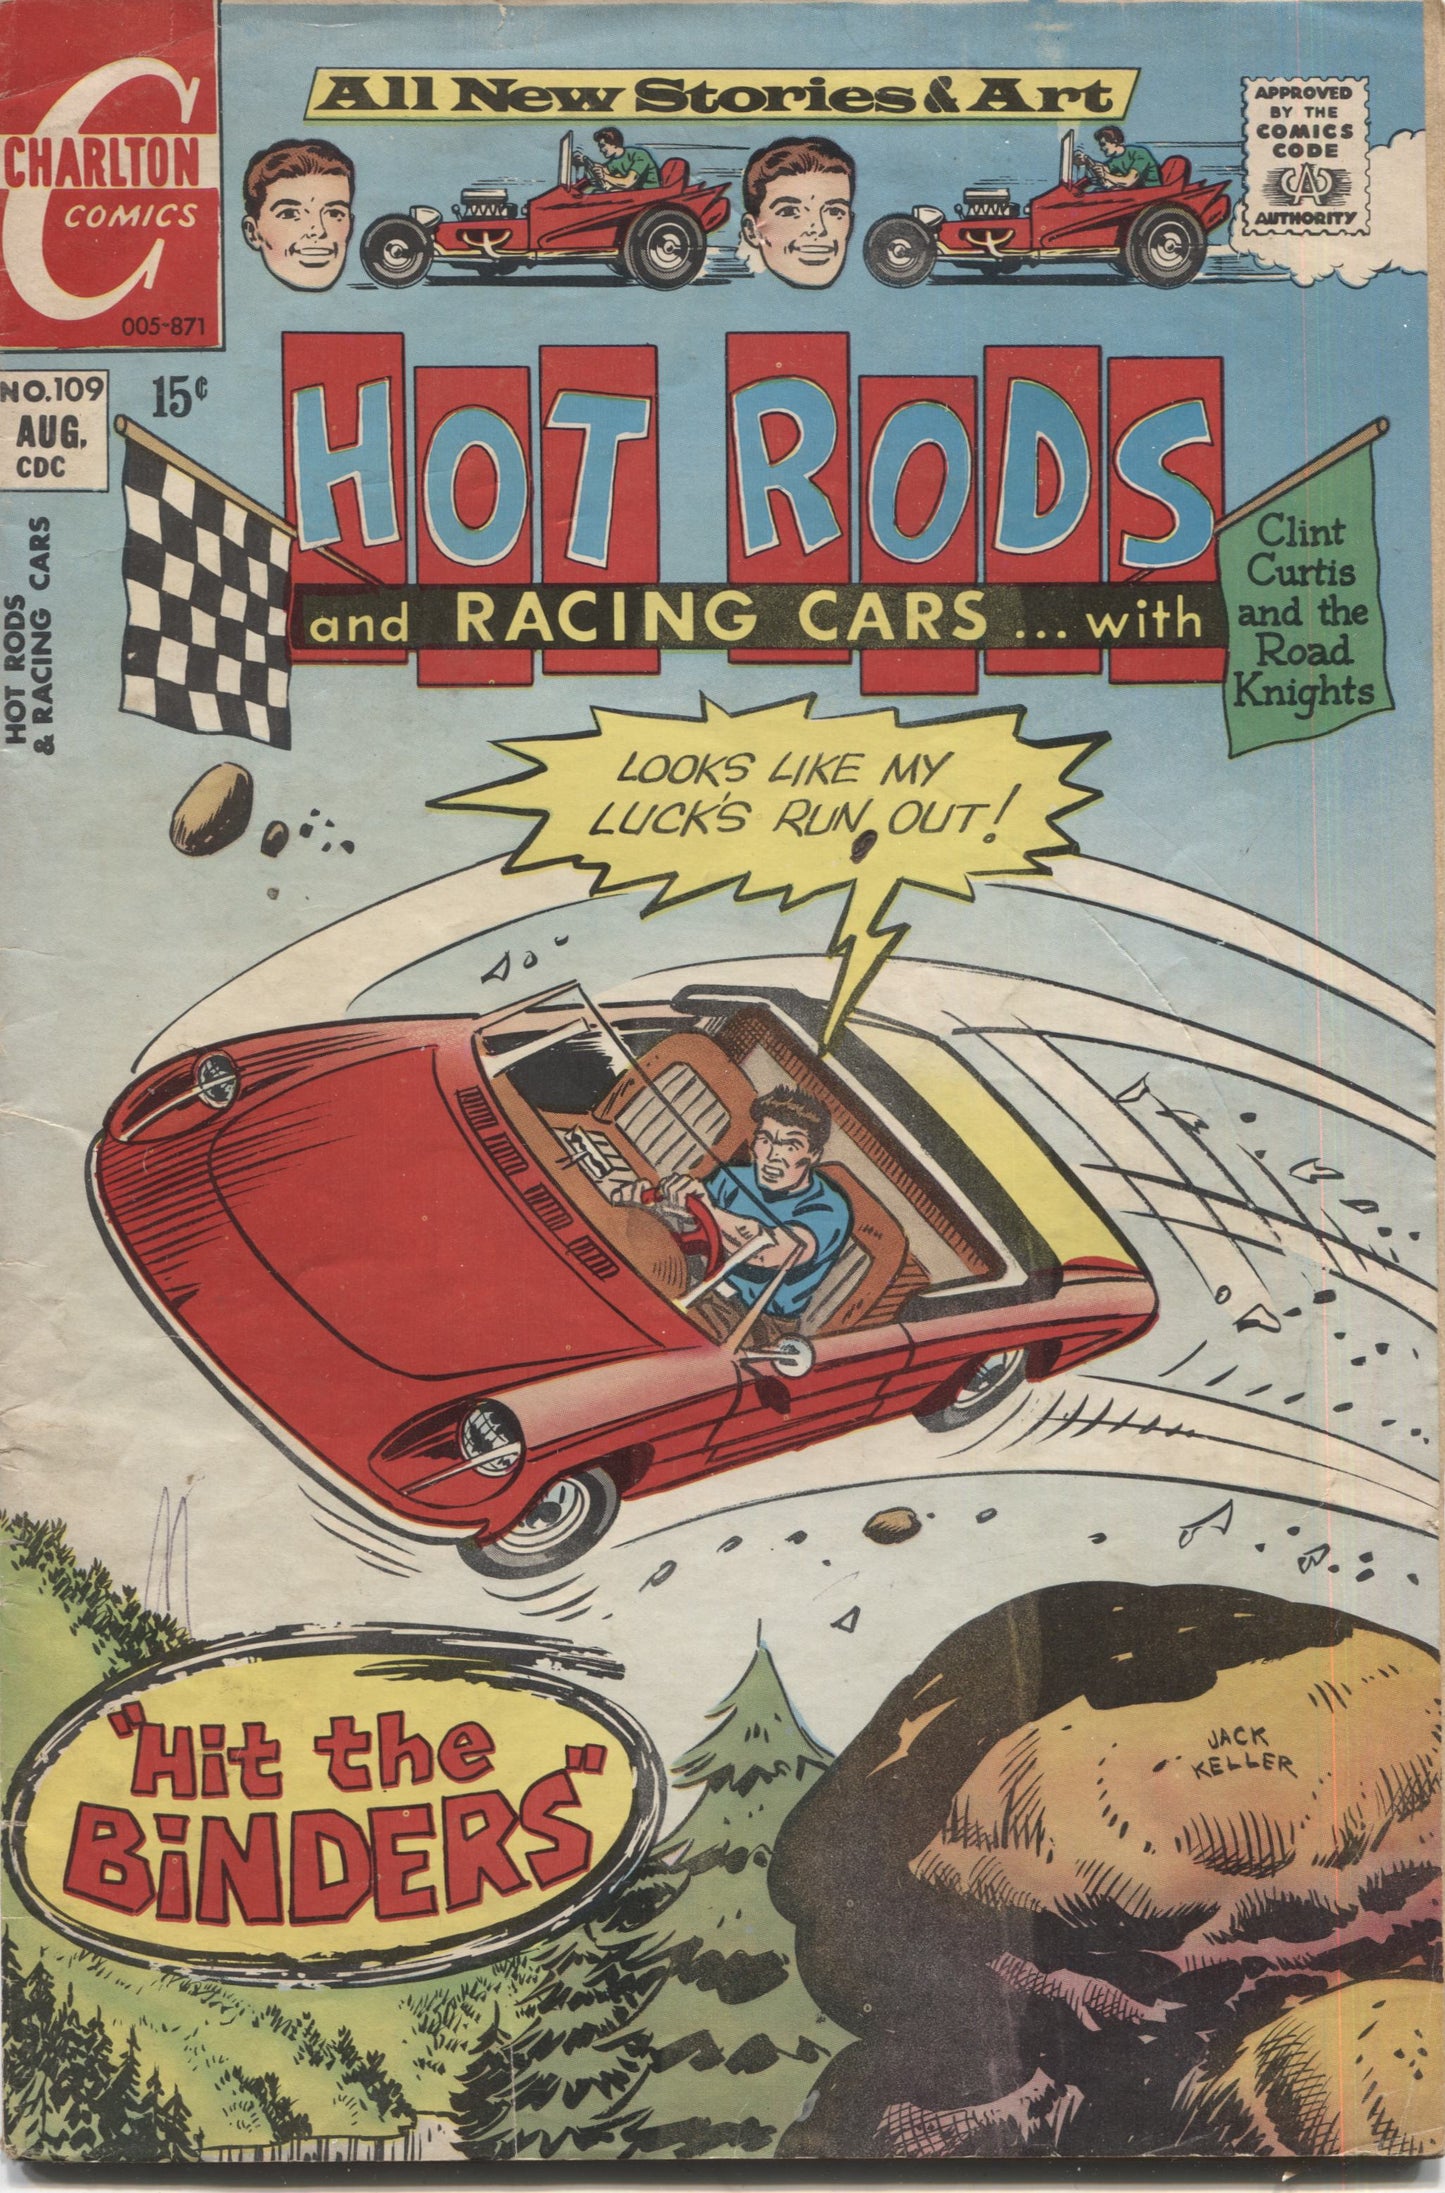 Hot Rods and Racing Cars No. 109, "Hit the Binders," Charlton Comics, August 1971